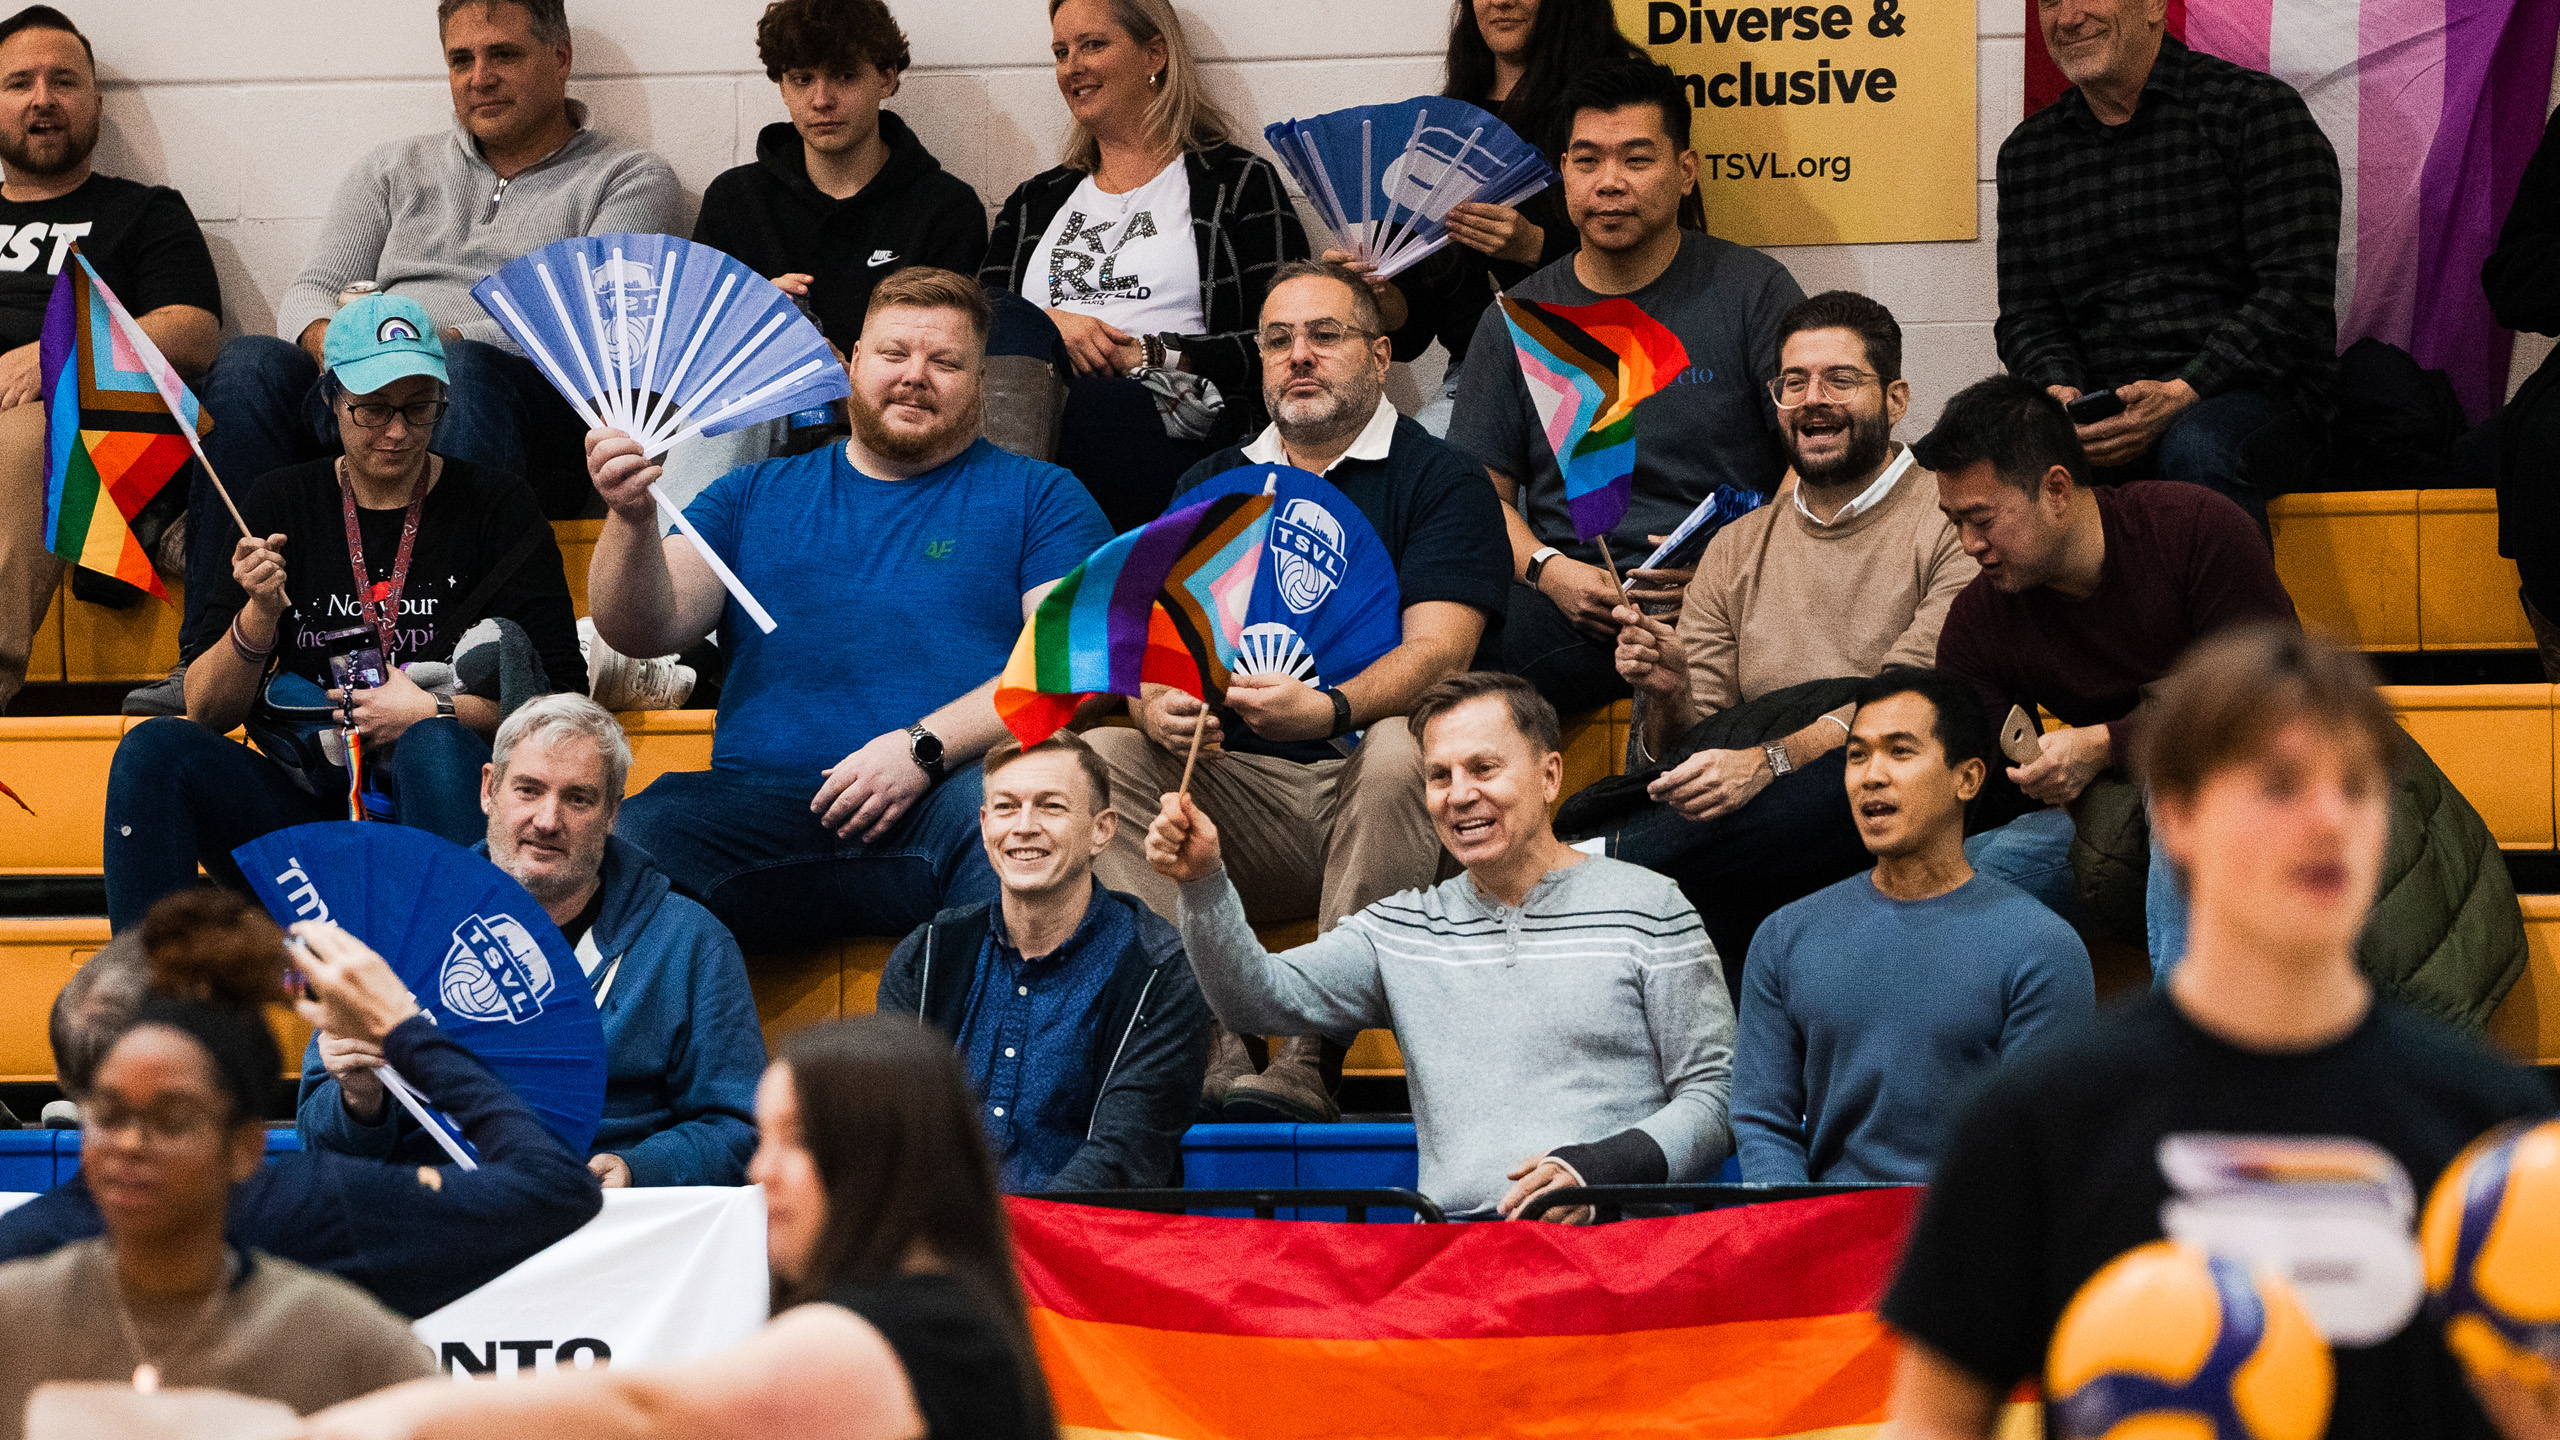 People in the crowd of the MAC wave Pride flags and folding fans